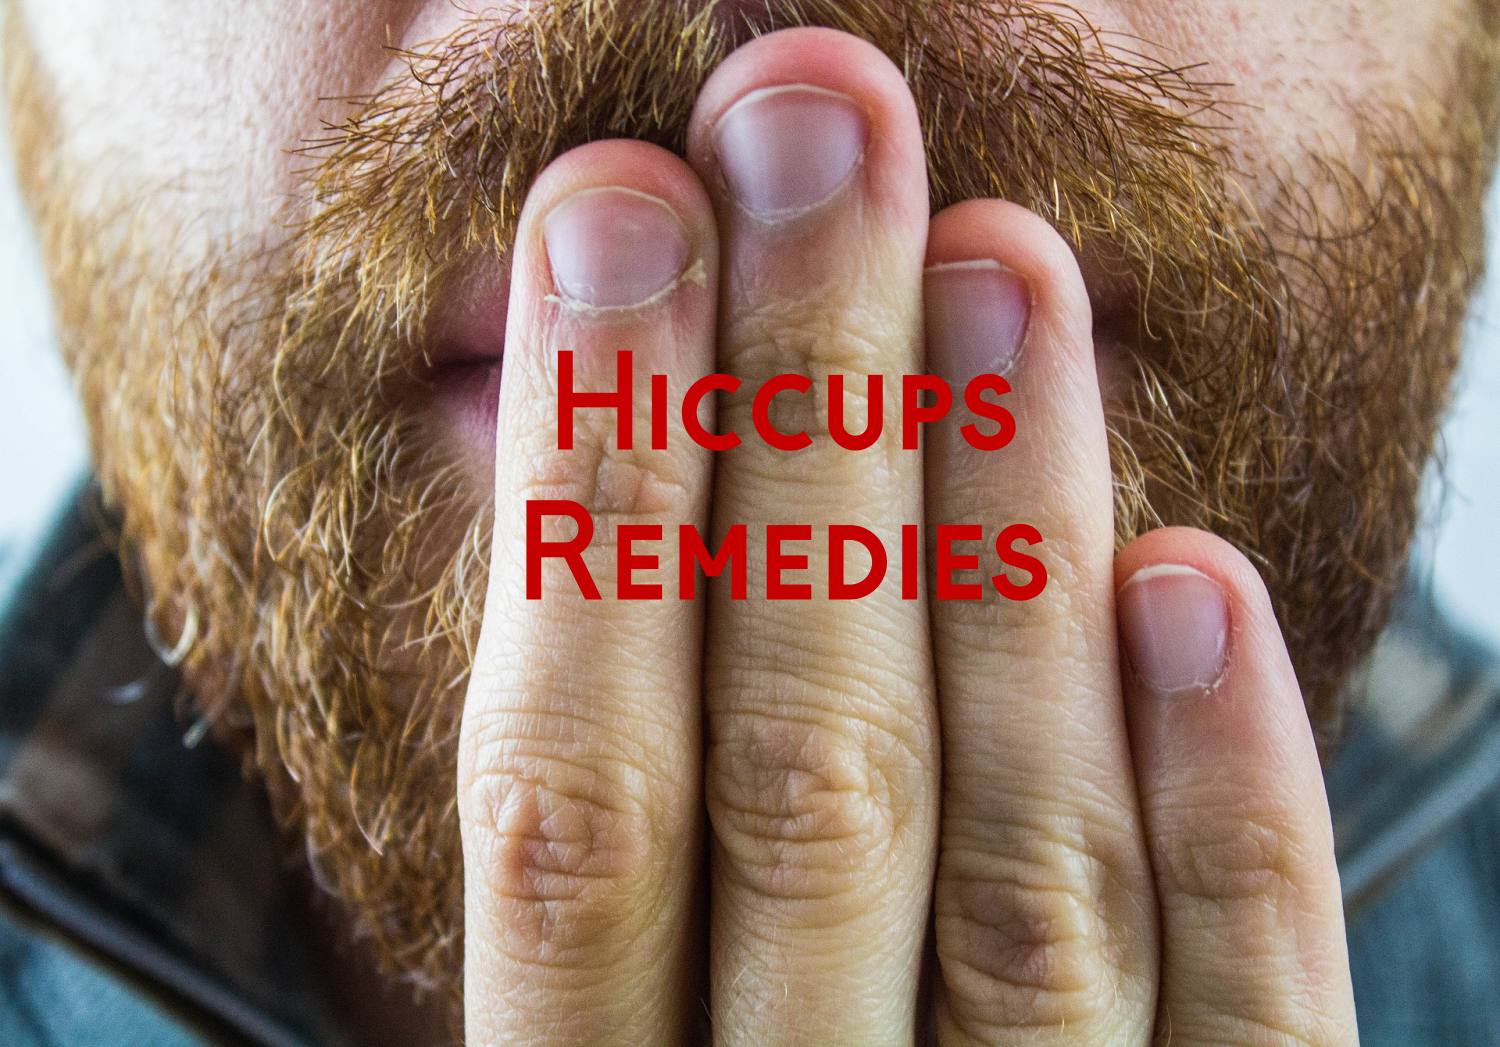 !0 Home Remedies for Hiccups